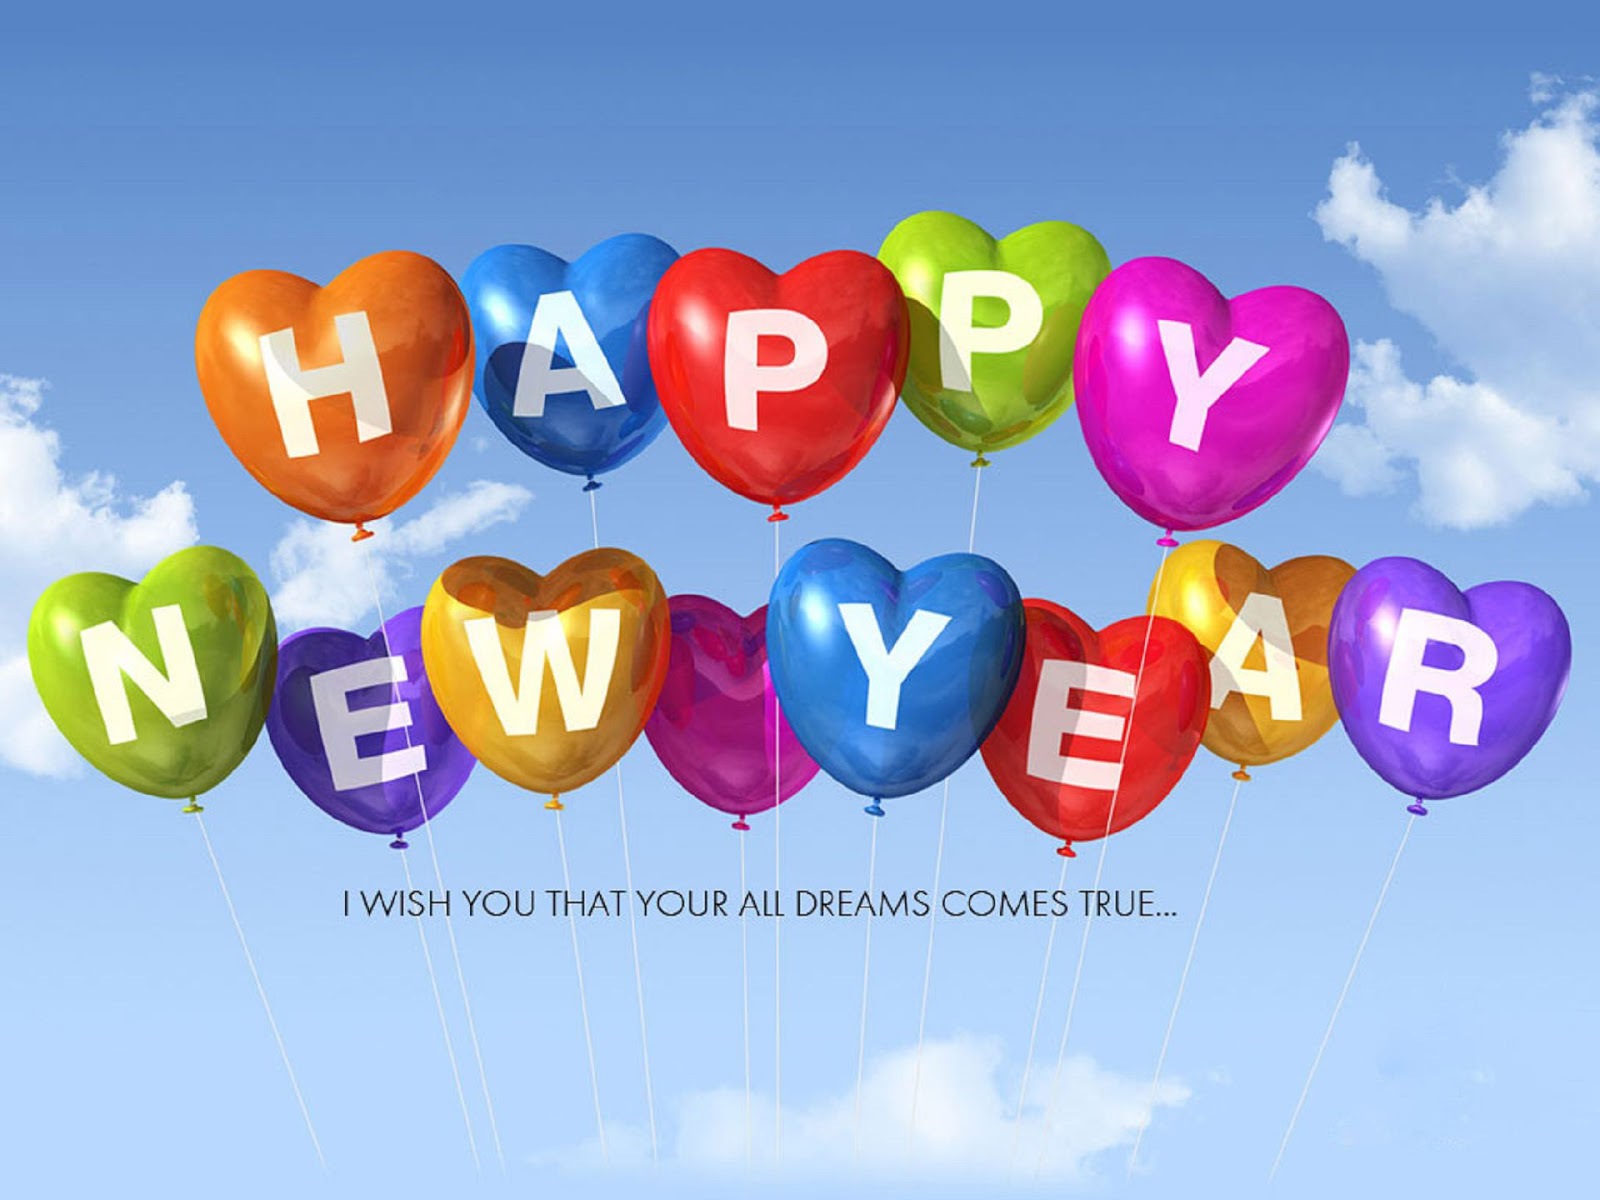 New Year 2014, I wish that all dreams come true wallpapers and ...